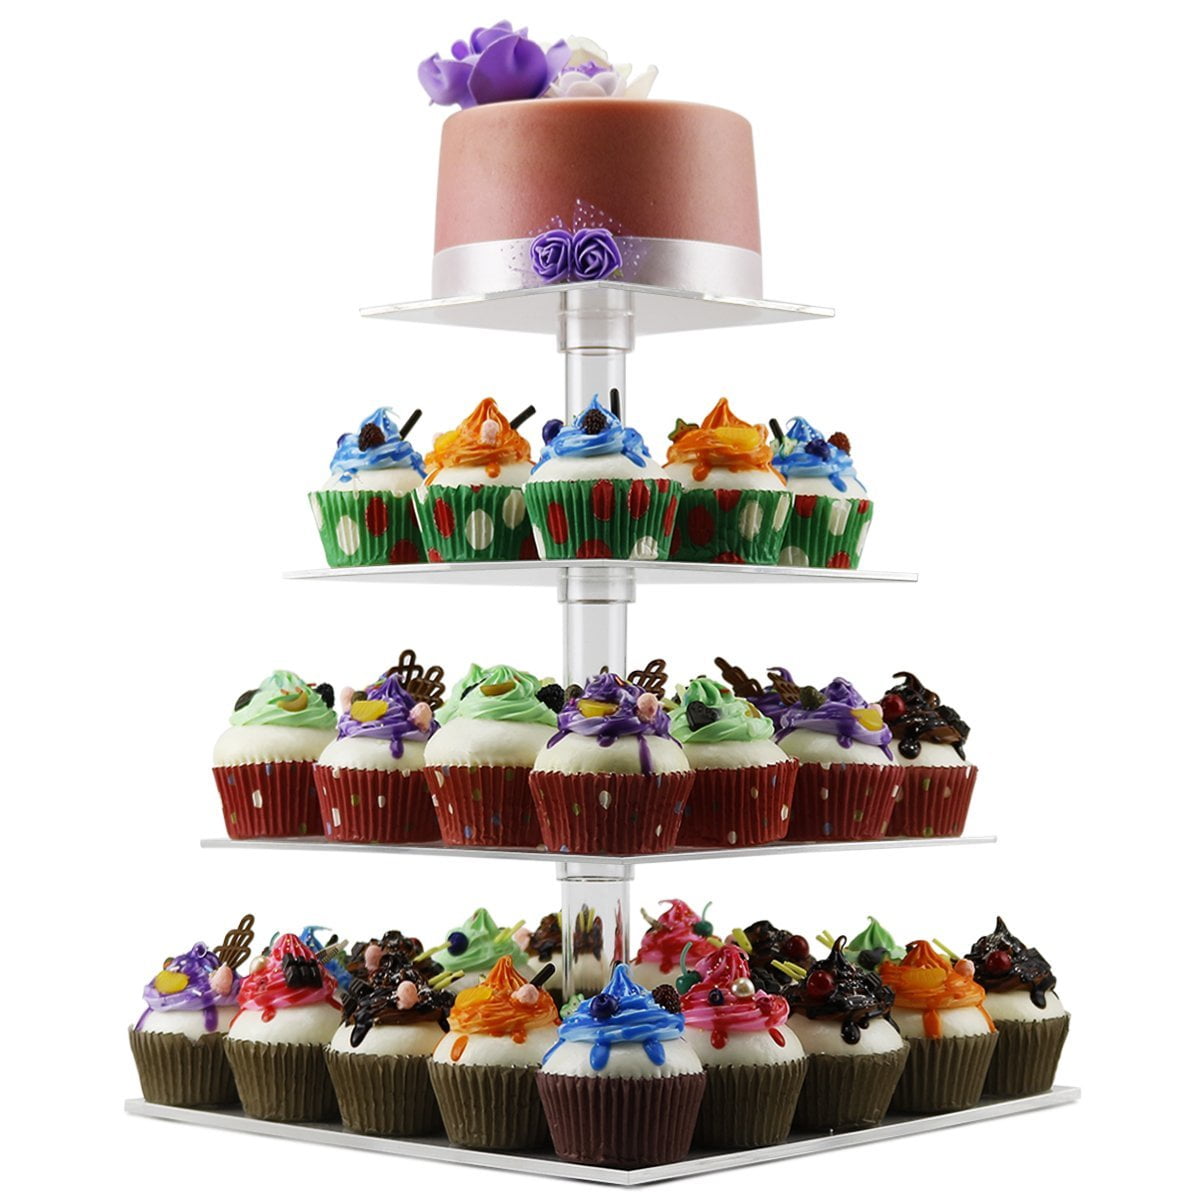 4 Tier Cupcake Holder Stand,Square Clear Acrylic Cupcake Display Riser